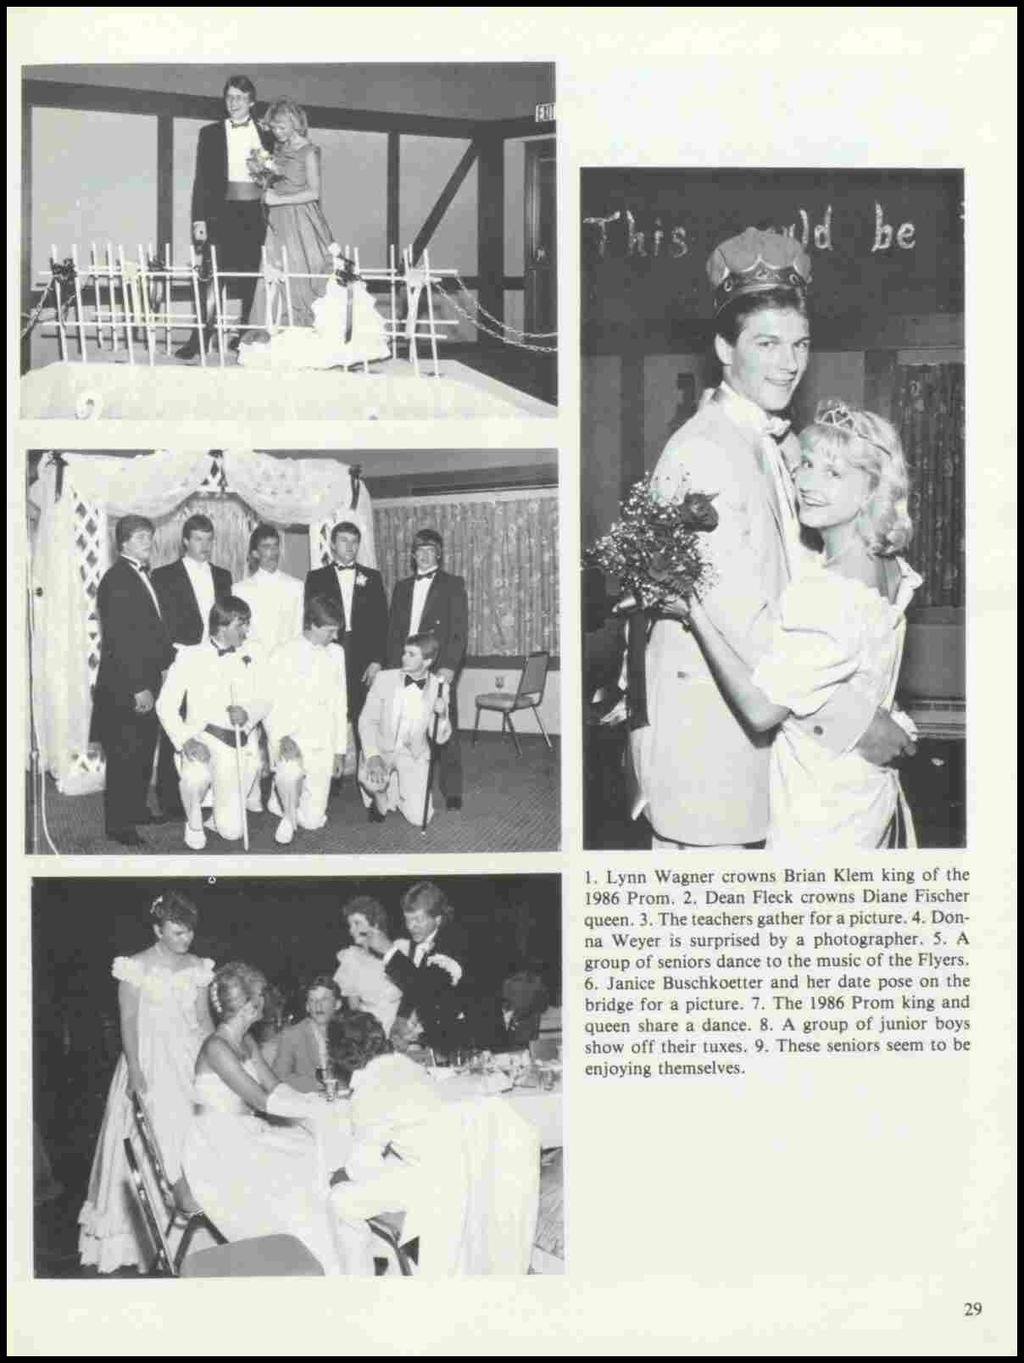 1. Lynn Wagner crowns Brian Klem king of the 1986 Prom. 2. Dean Fleck crowns Diane Fischer queen. 3. The teachers gather for a picture. 4. Donna Weyer is surprised by a photographer. 5.